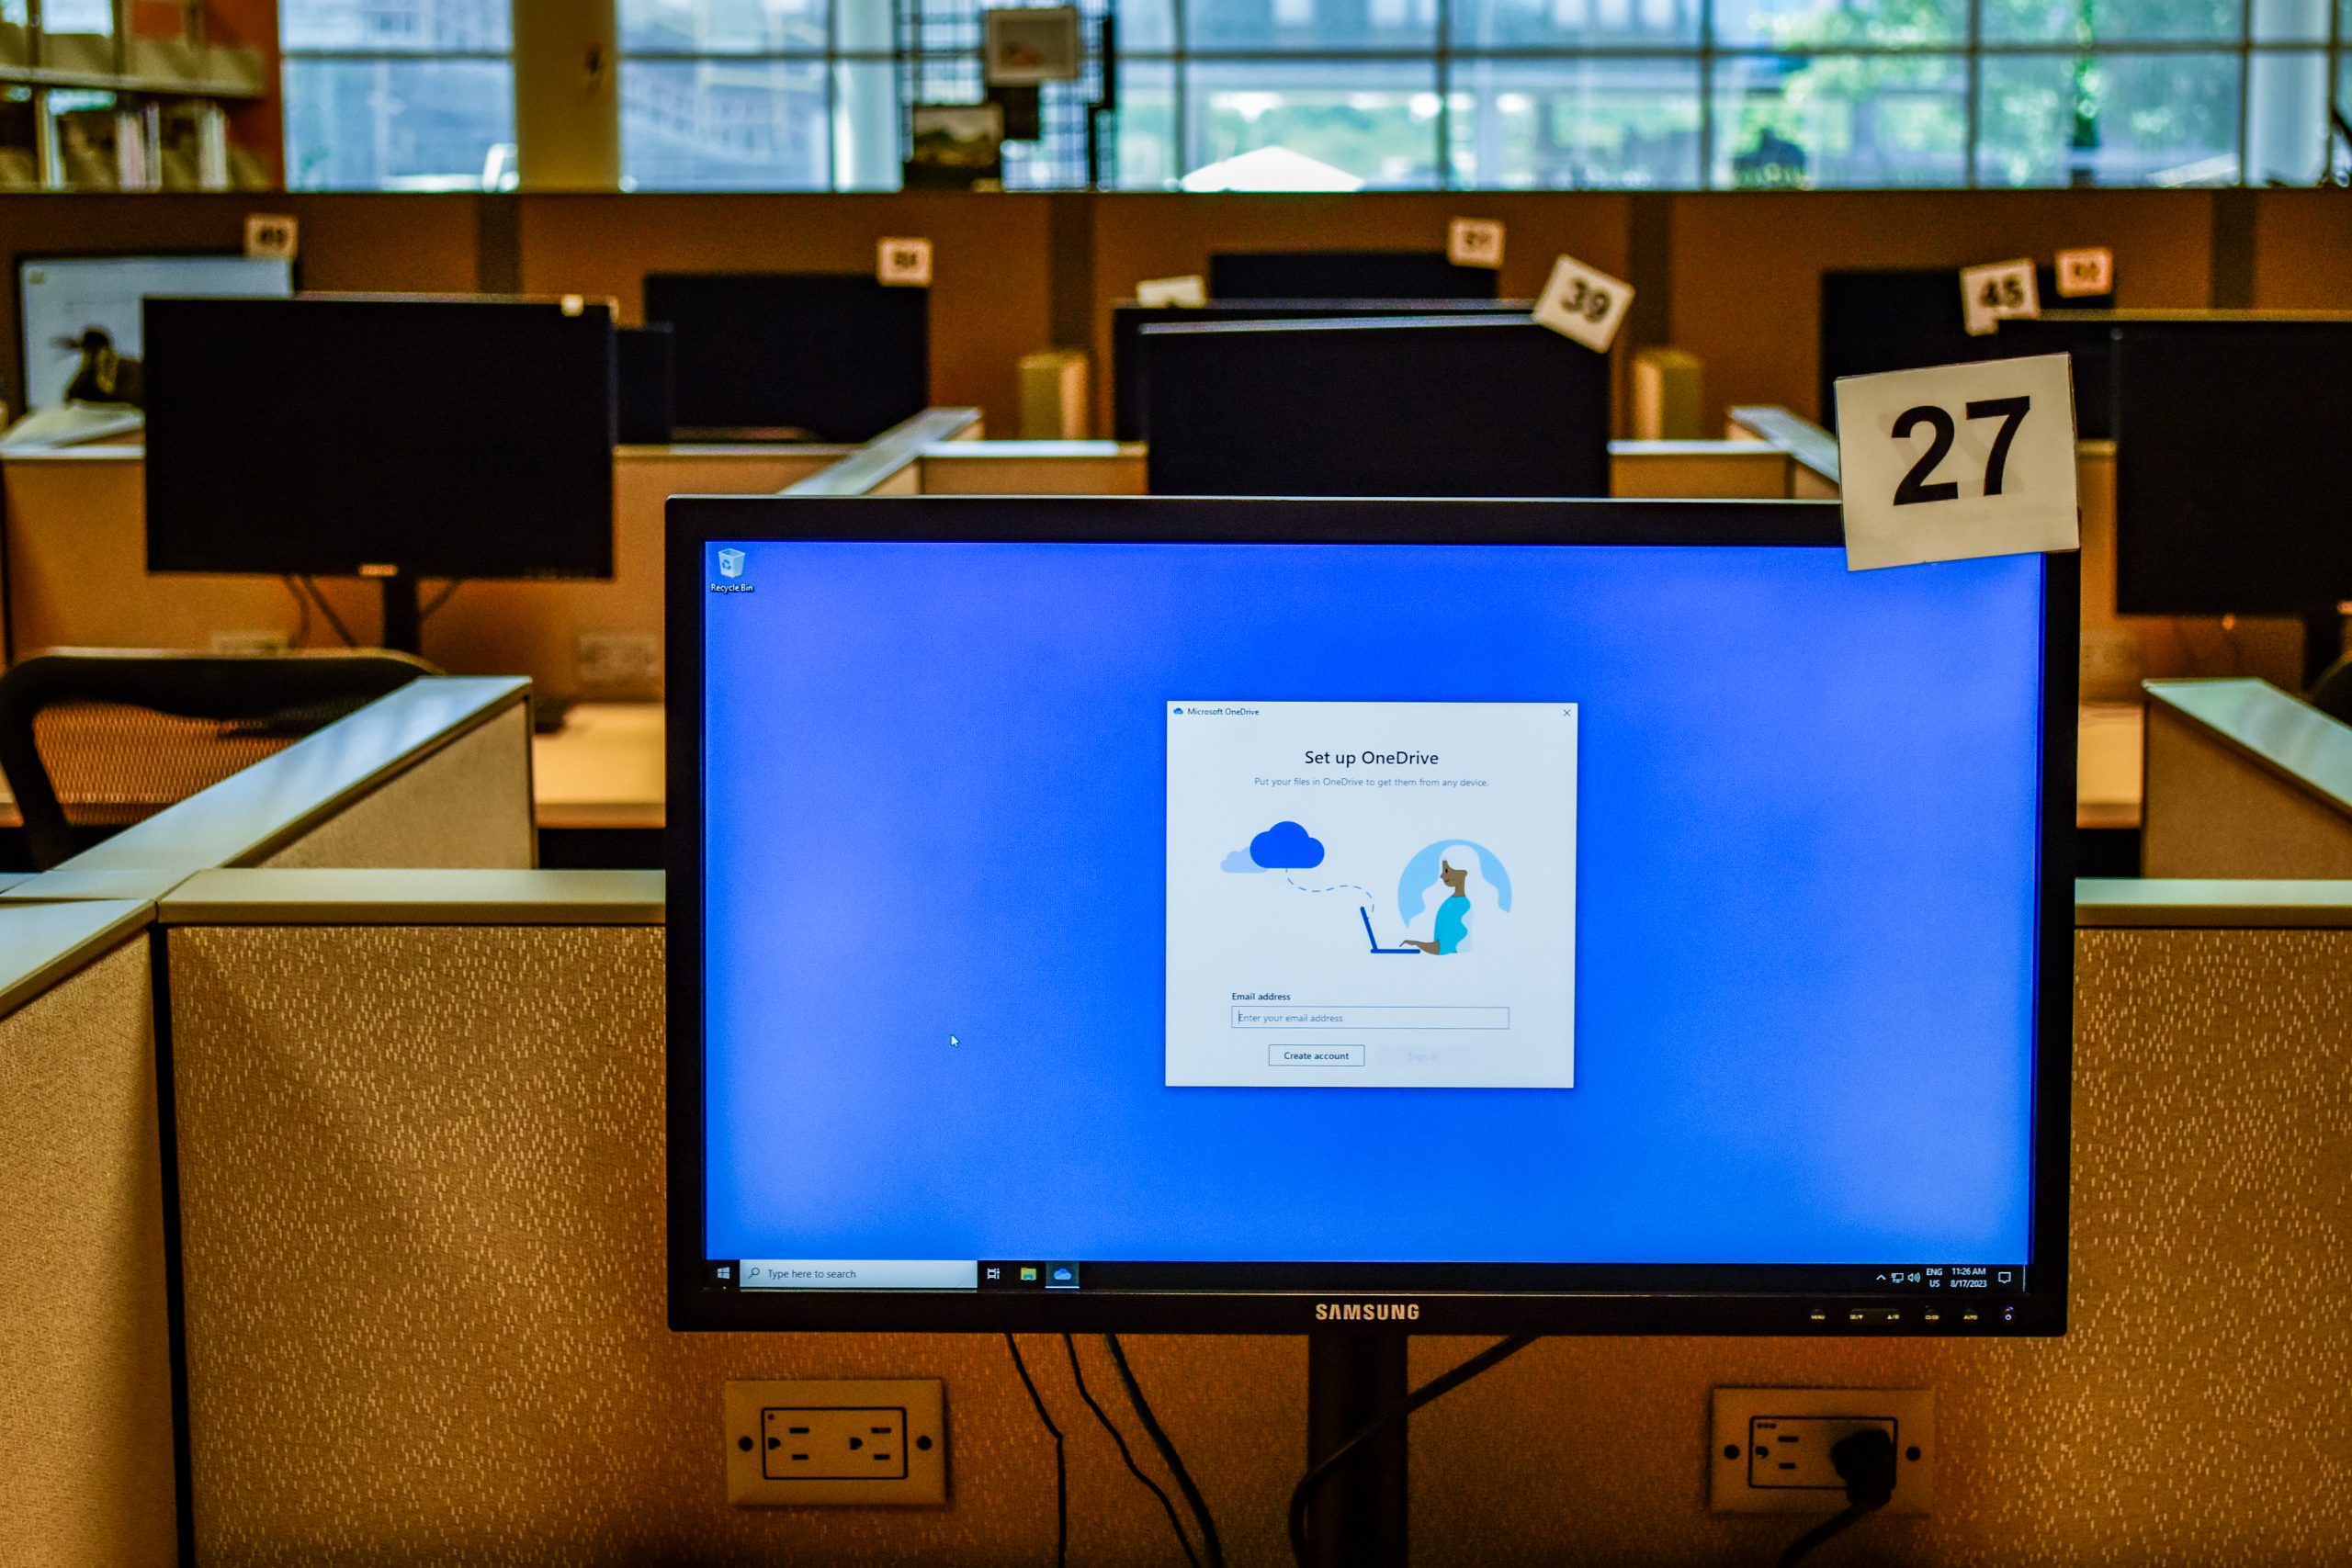 Alex Hoben/The Collegian A computer displays the OneDrive login screen in the SE Judith J. Carrier Library. OneDrive is Microsoft’s file storage system.